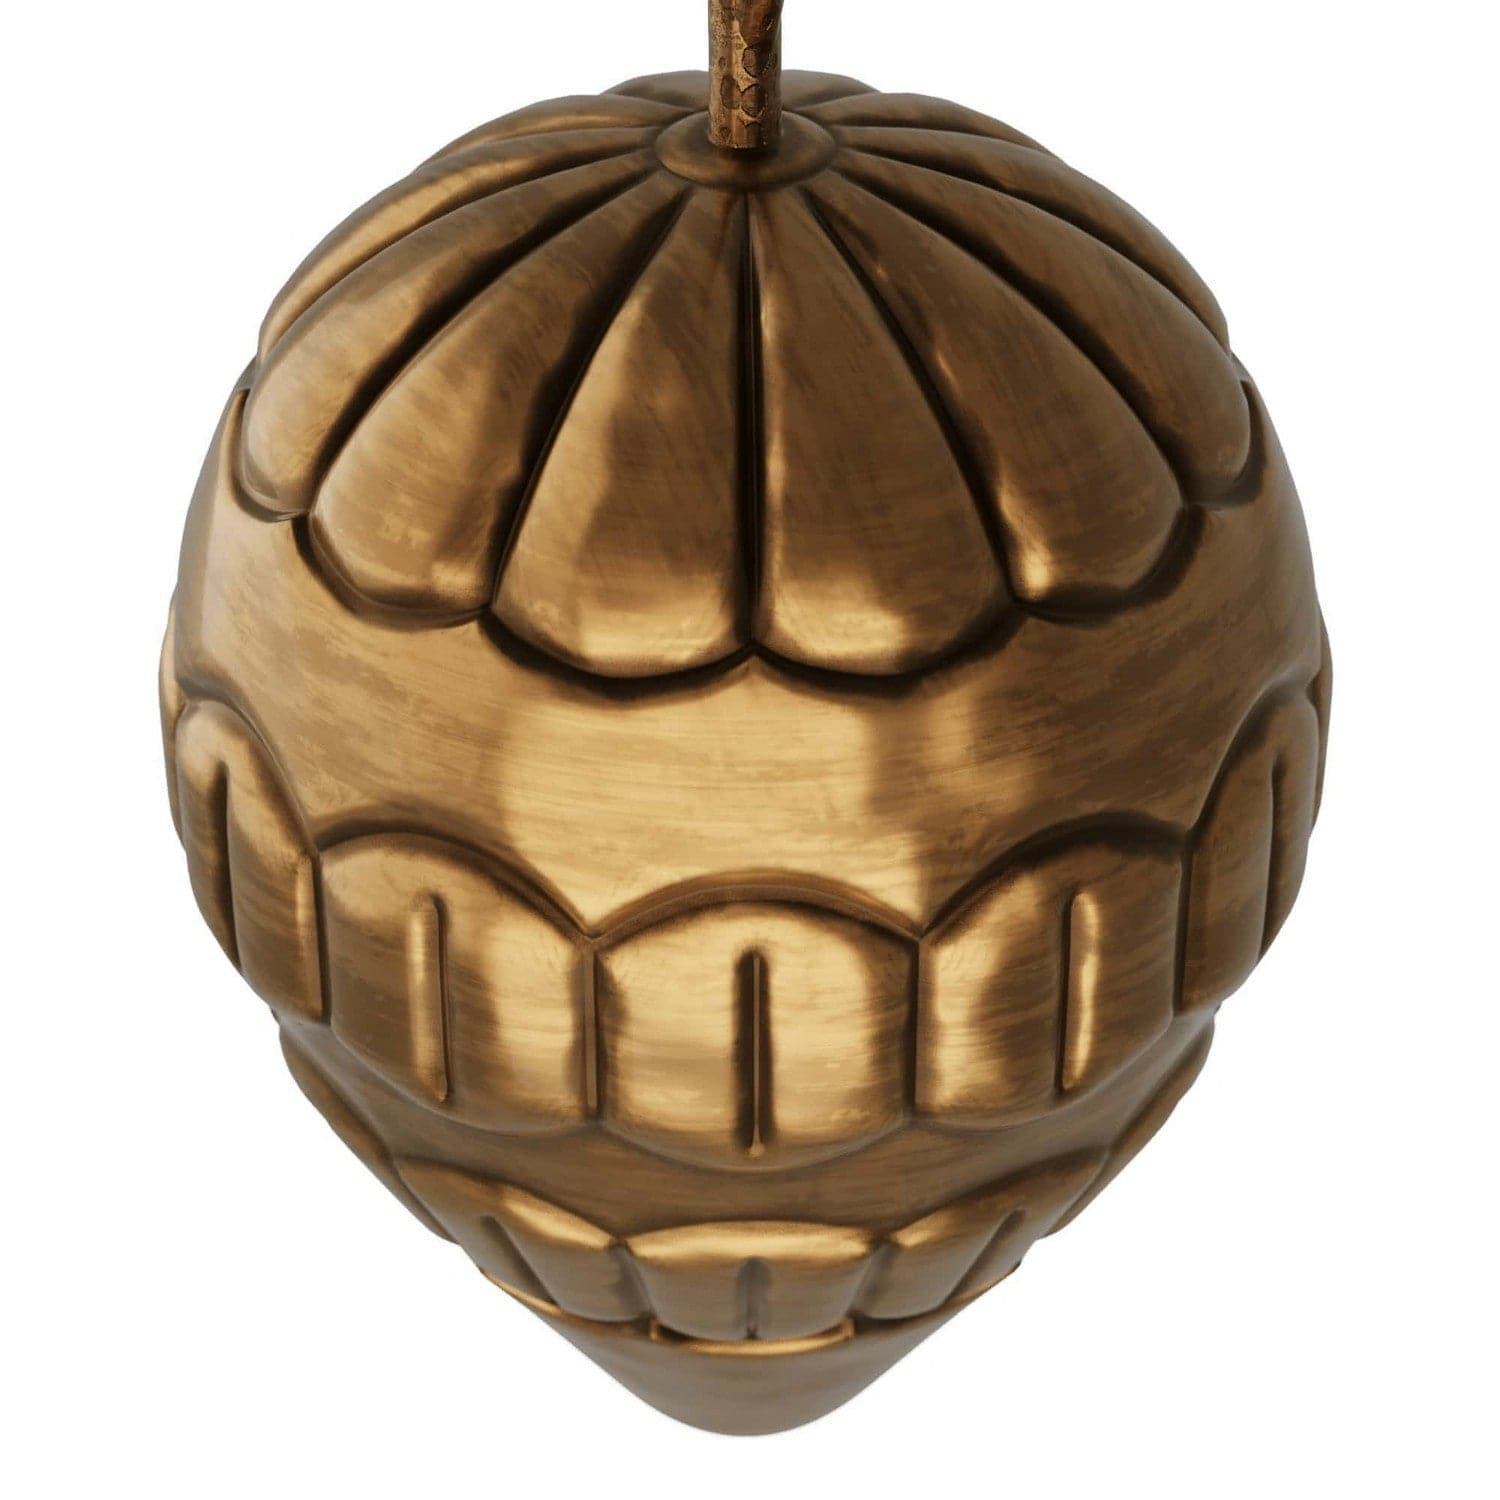 Sculpture from the Soursop collection in Vintage Brass finish